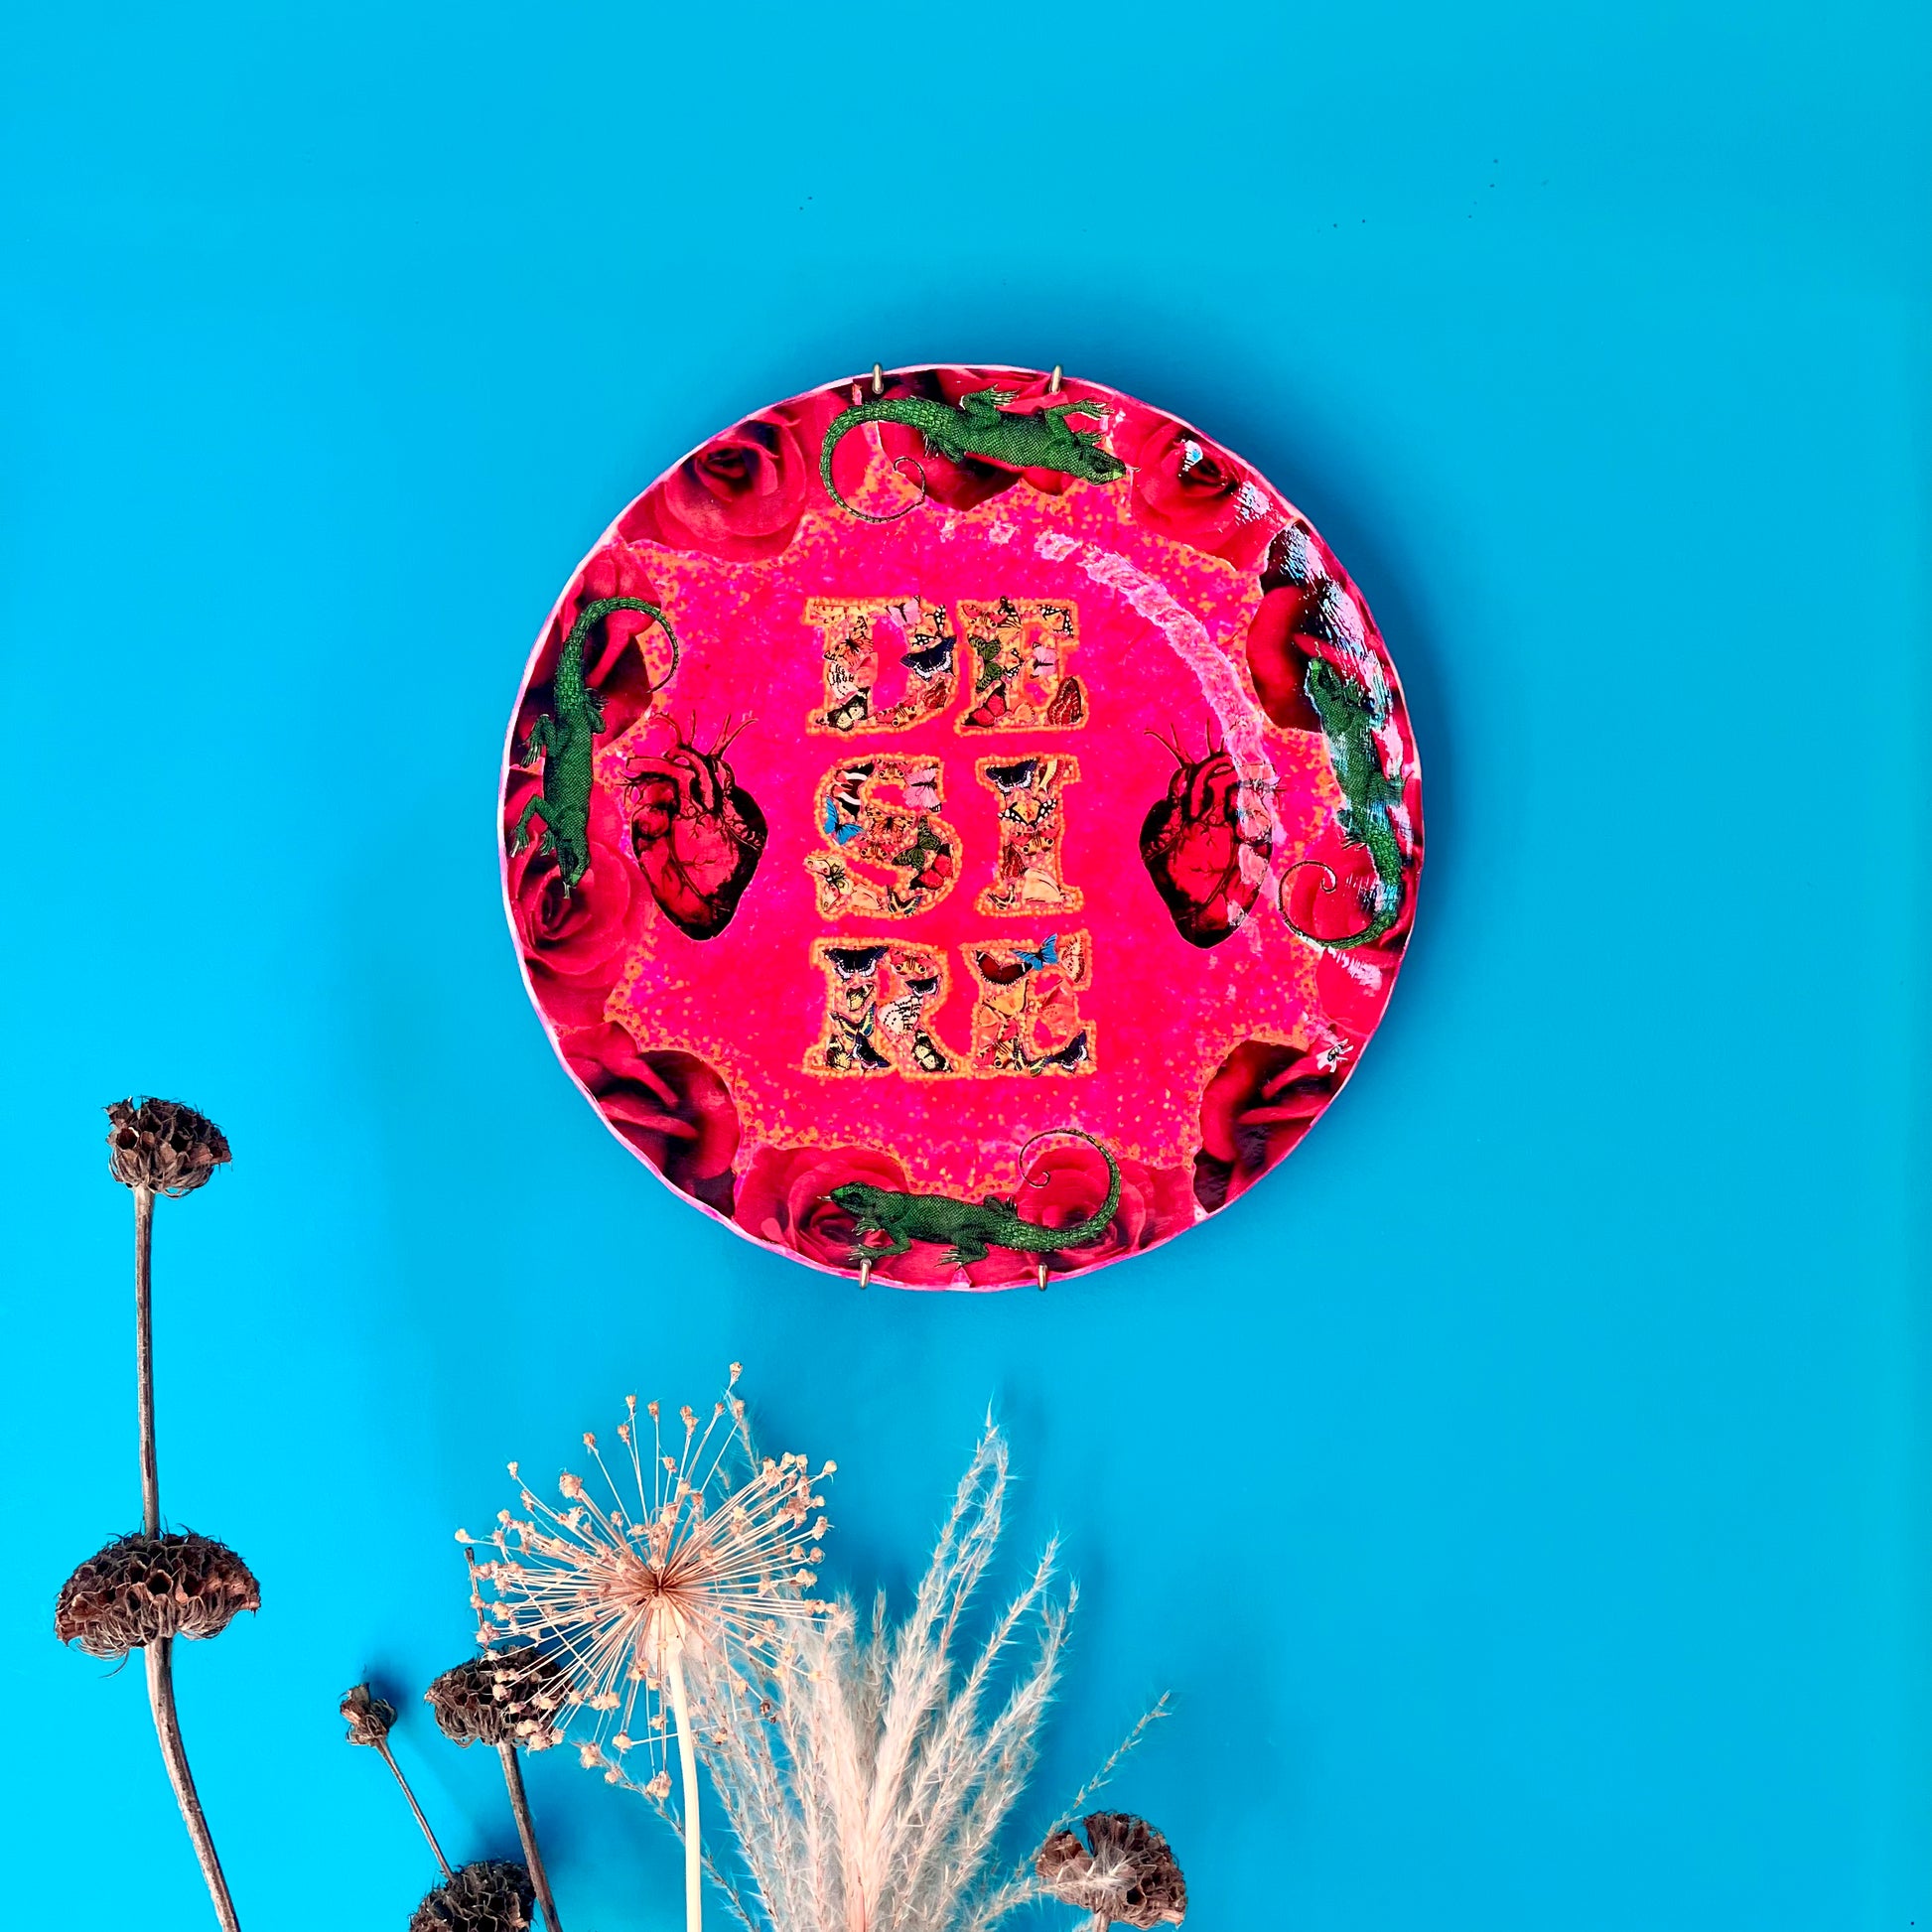 "Desire" Wall Plate by House of Frisson, featuring a collage with the word "desire" written with moths, and a frame of red roses and green lizards, on a hot pink background. Plate hanging on a blue wall.